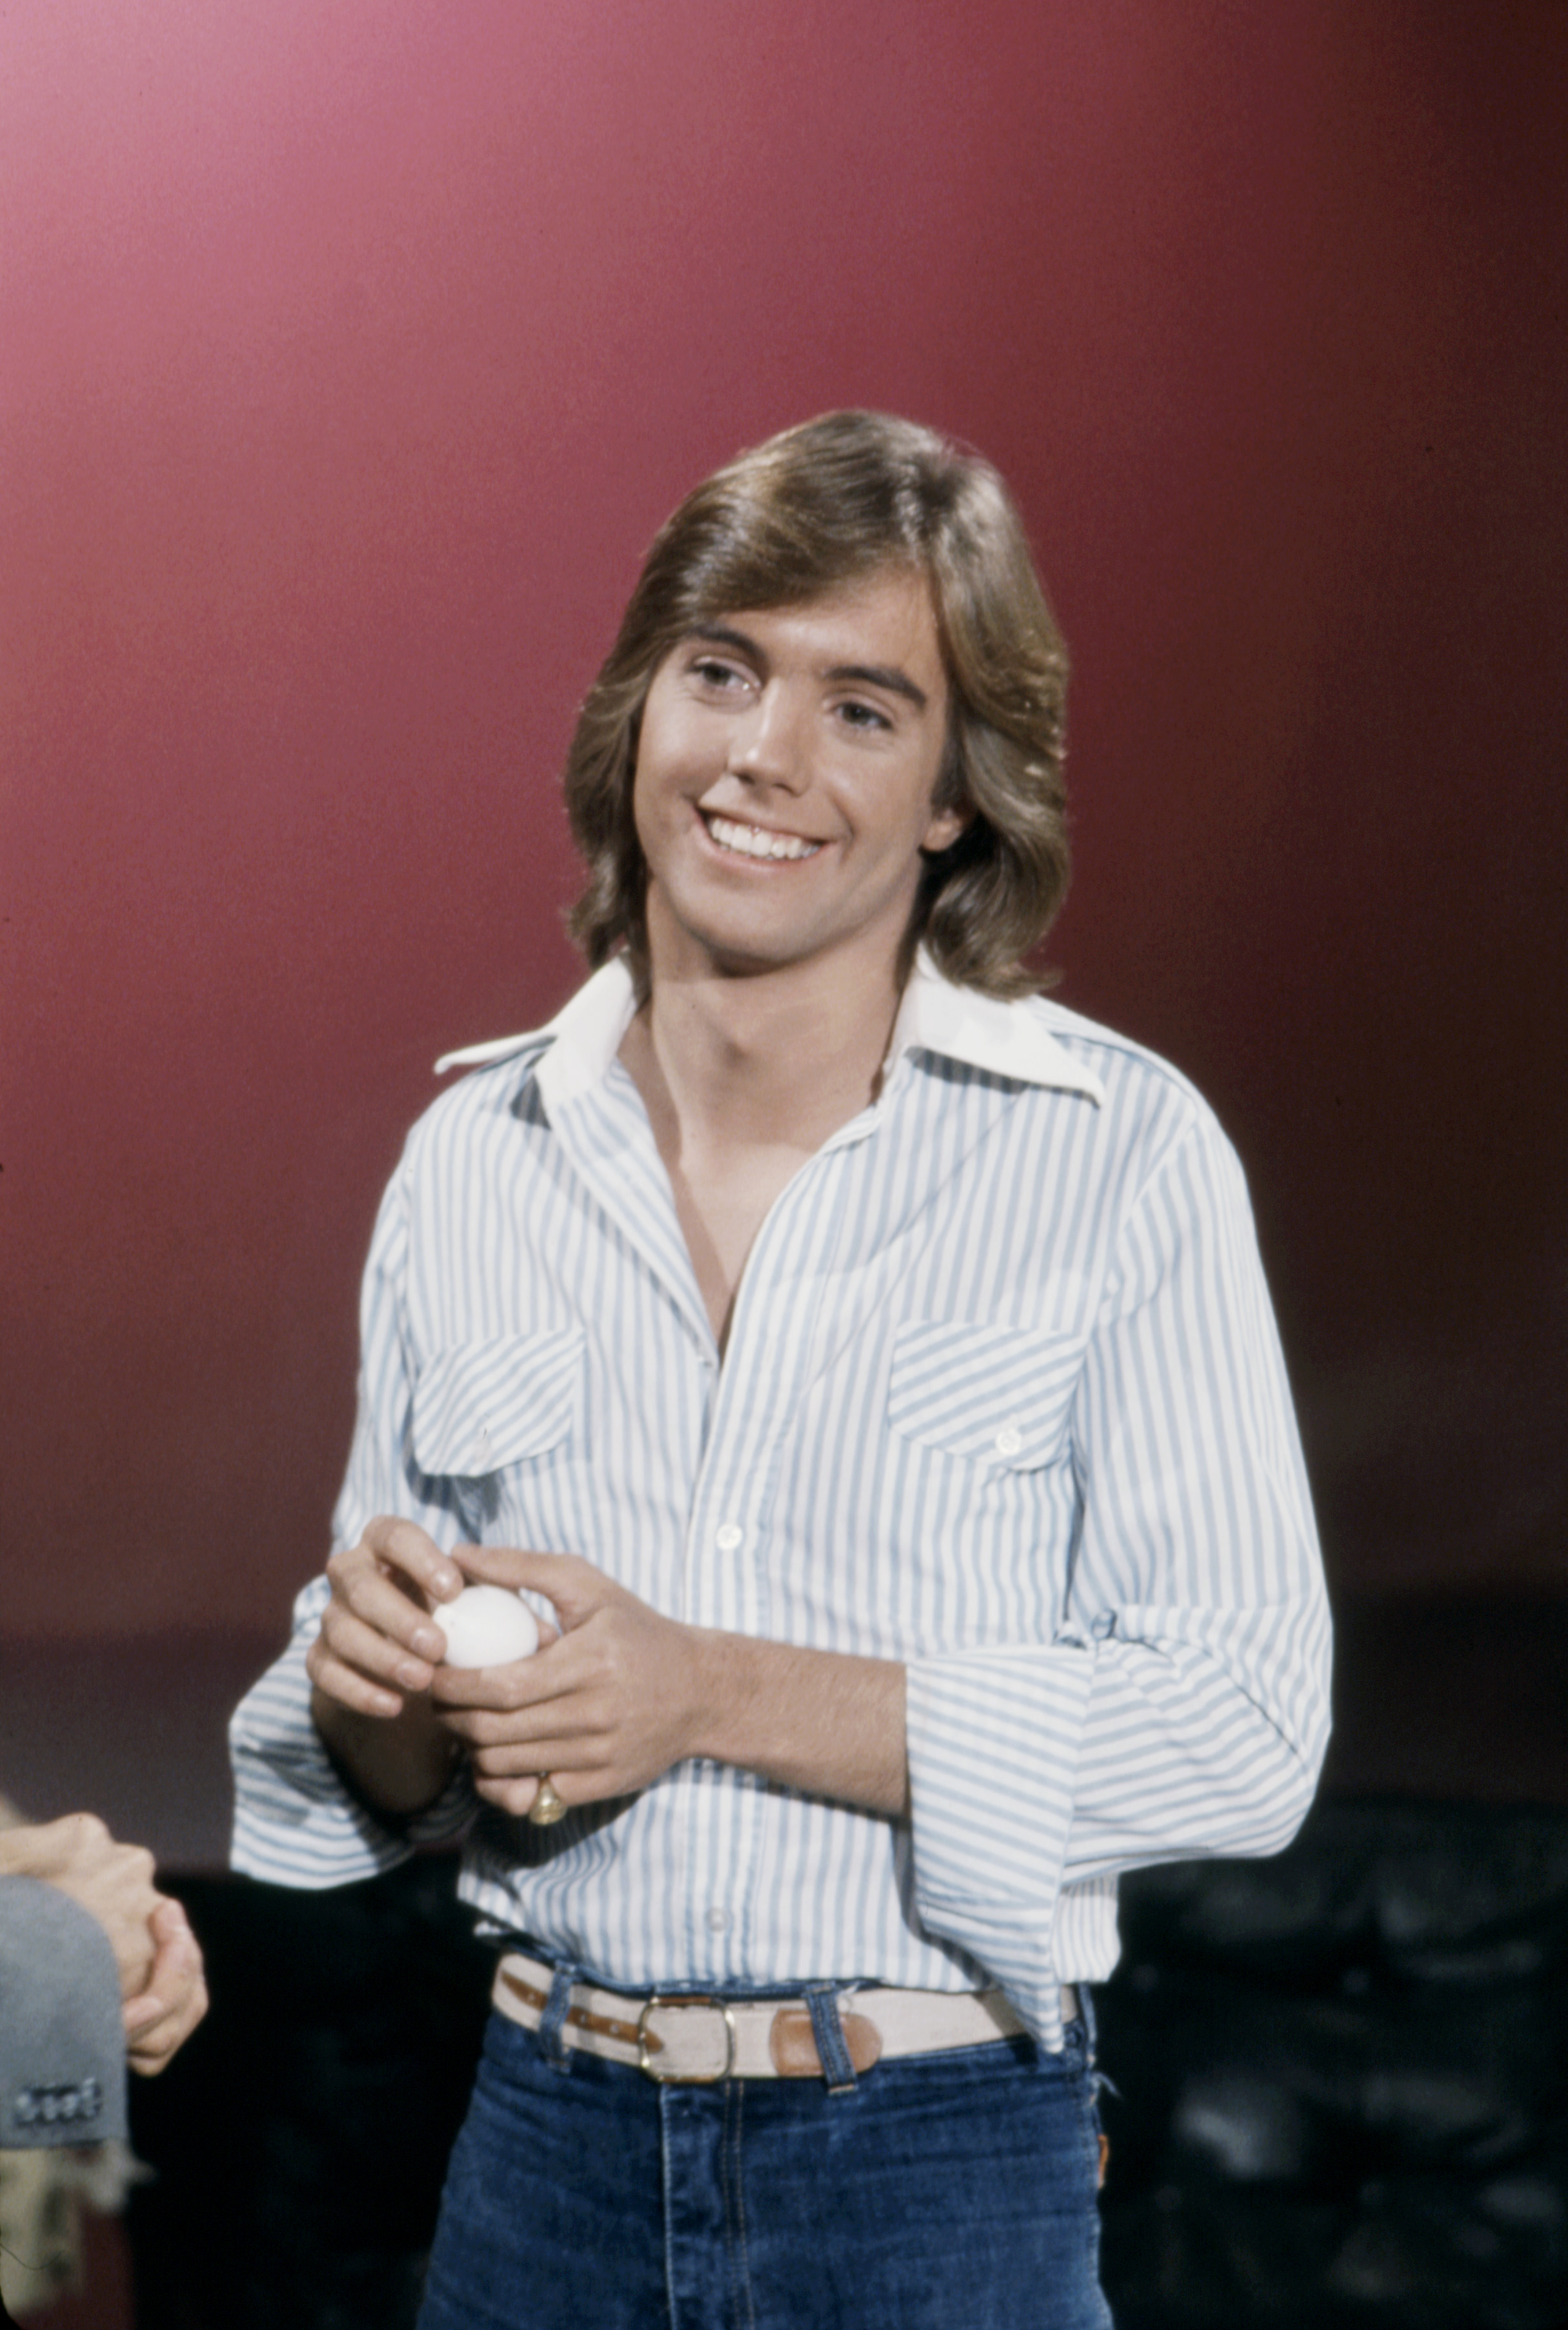 Shaun Cassidy appearing in the ABC tv special "The Magic of ABC" circa 1977 | Source: Getty Images